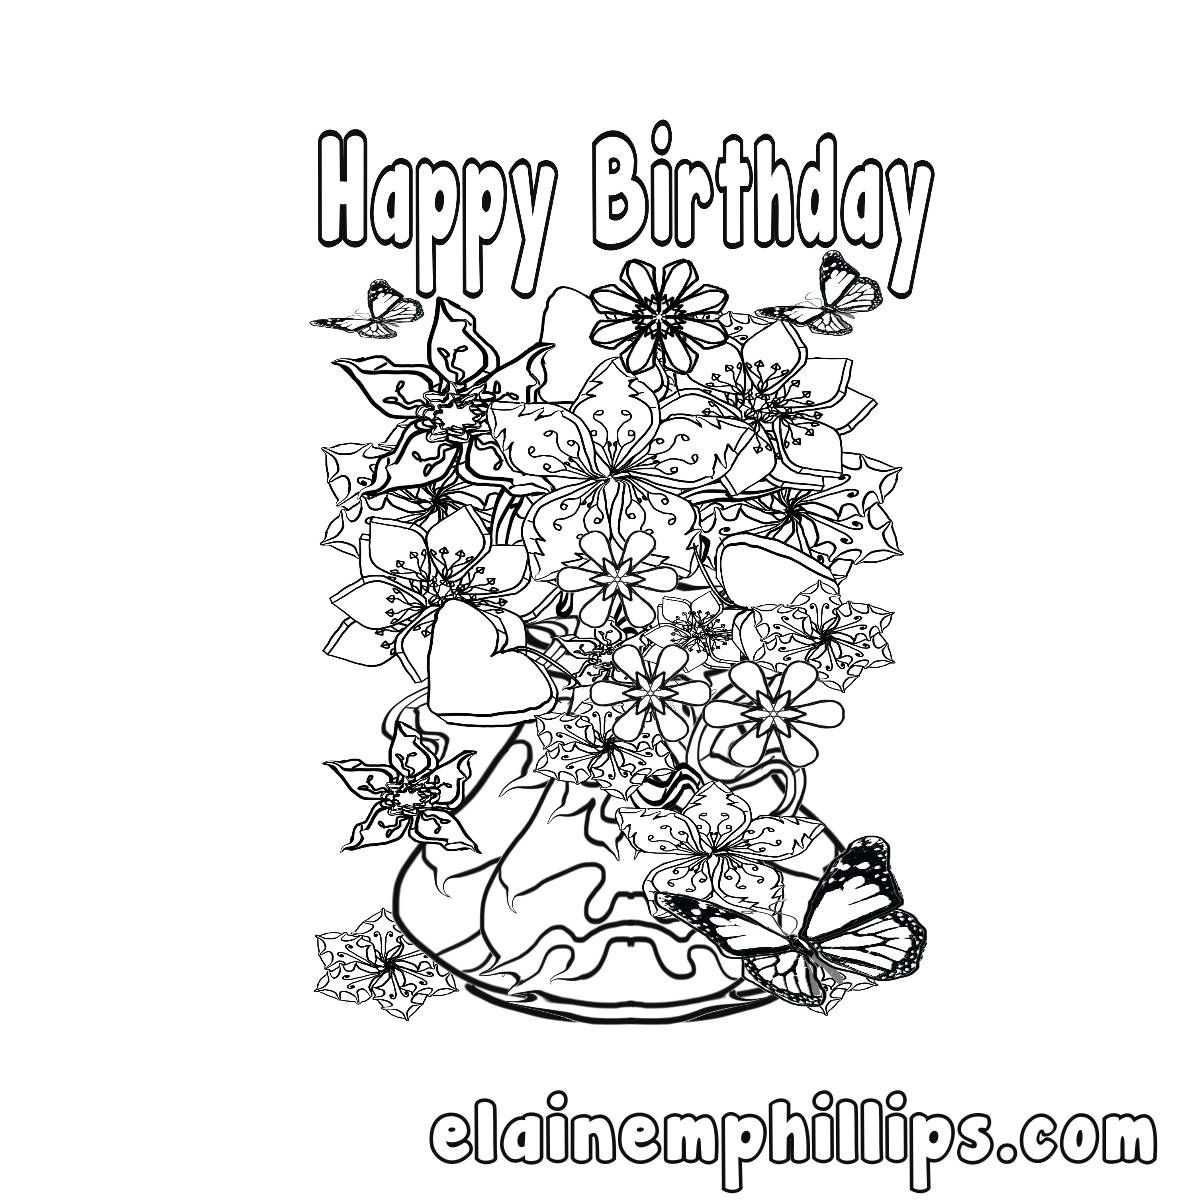 Coloring : Phenomenal Printableg Birthday Card Free For In Mom Birthday Card Template